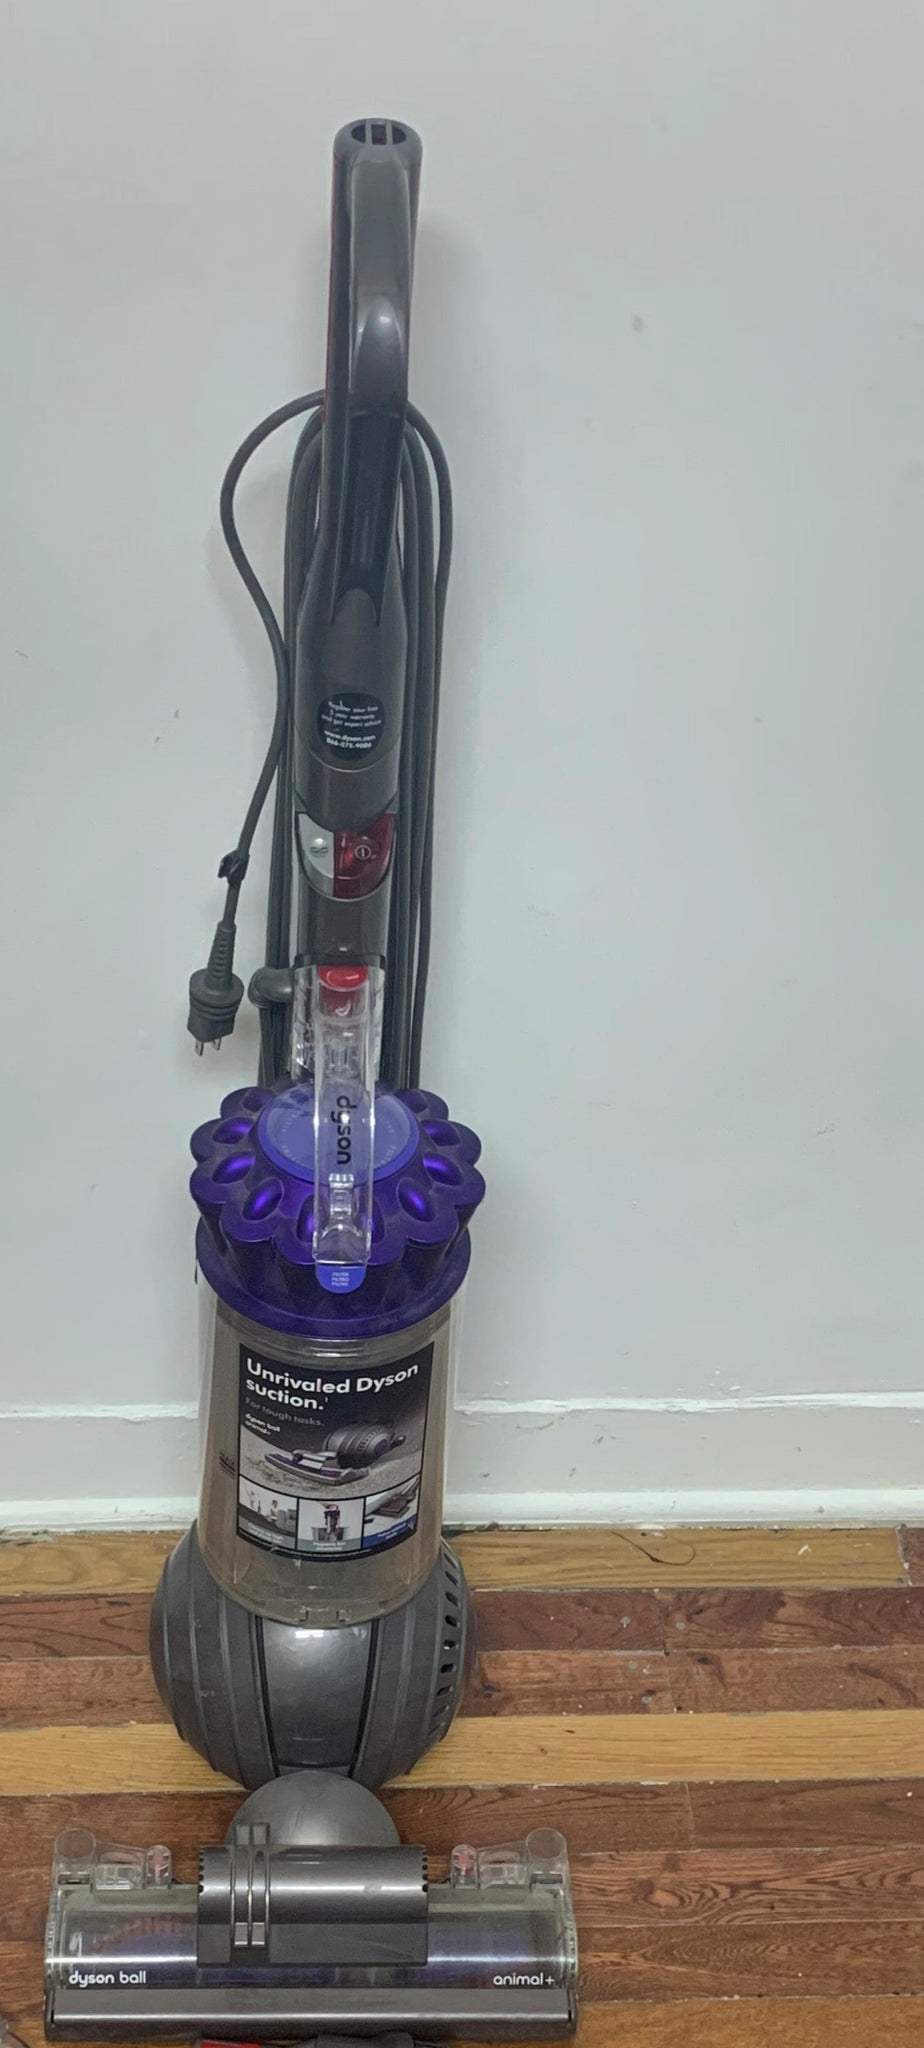 Dyson UP13 Ball Animal Upright Vacuum Cleaner, Purple